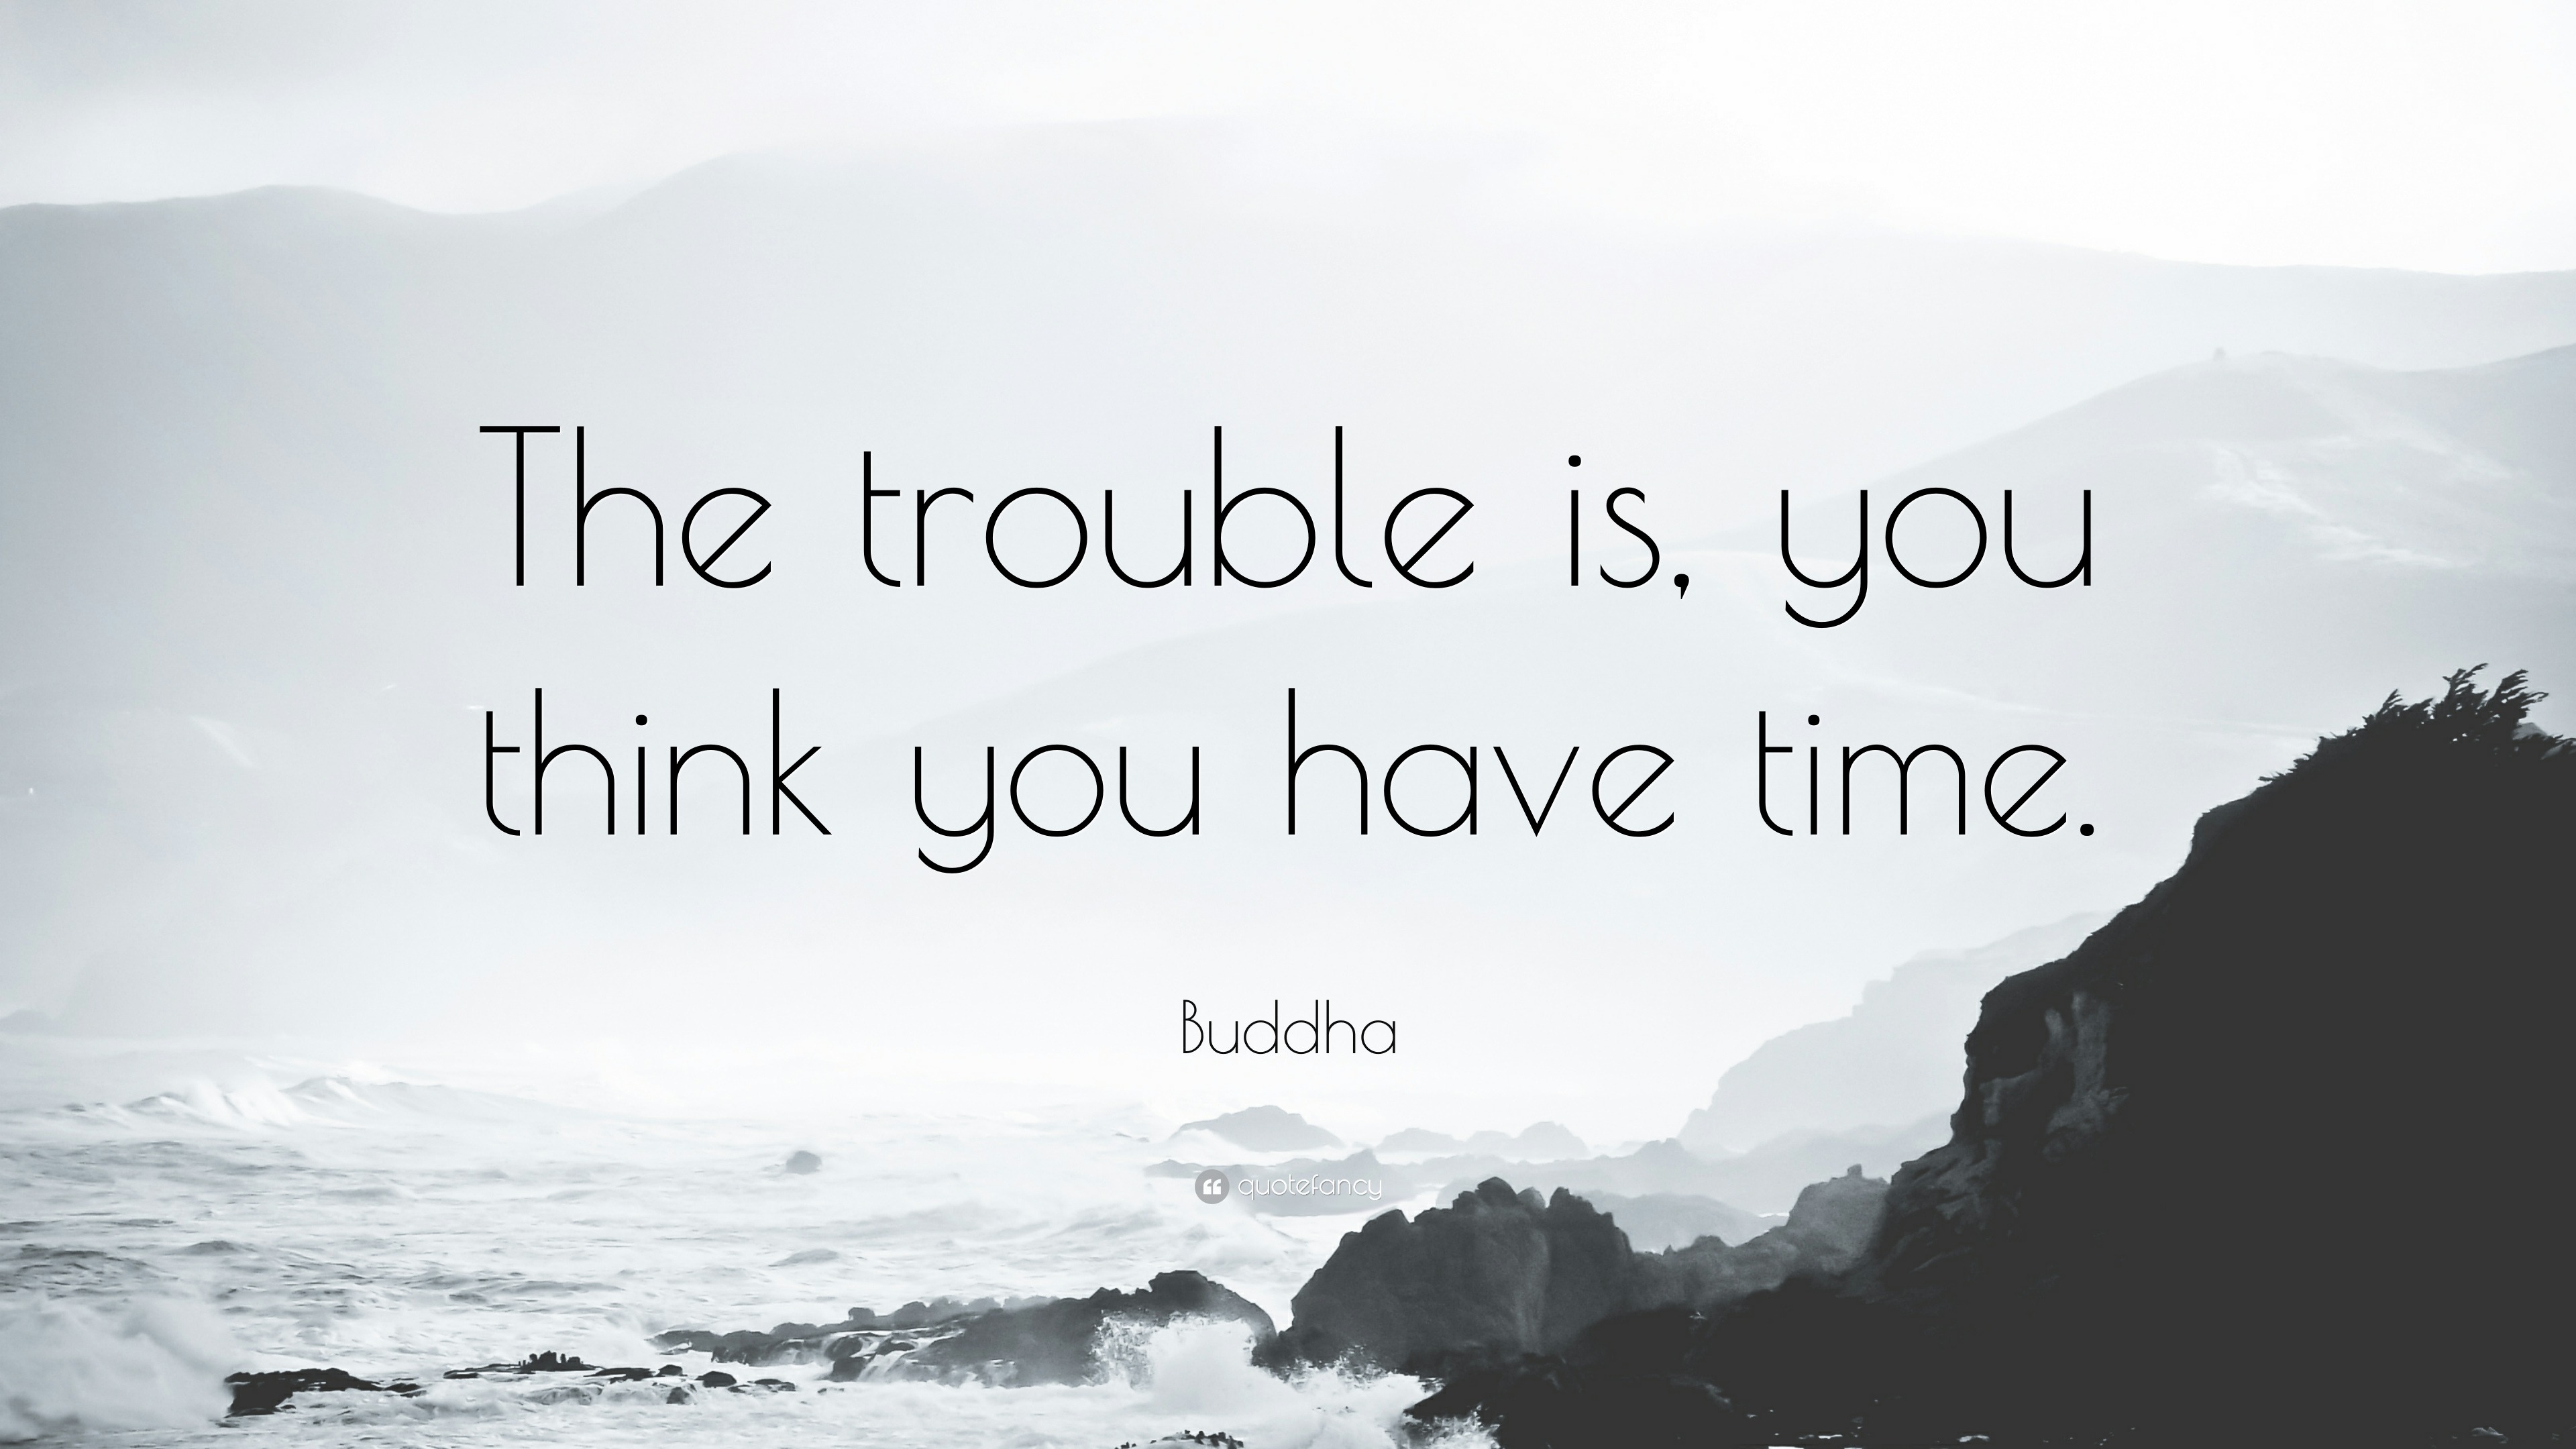 558244-Buddha-Quote-The-trouble-is-you-think-you-have-time.jpg